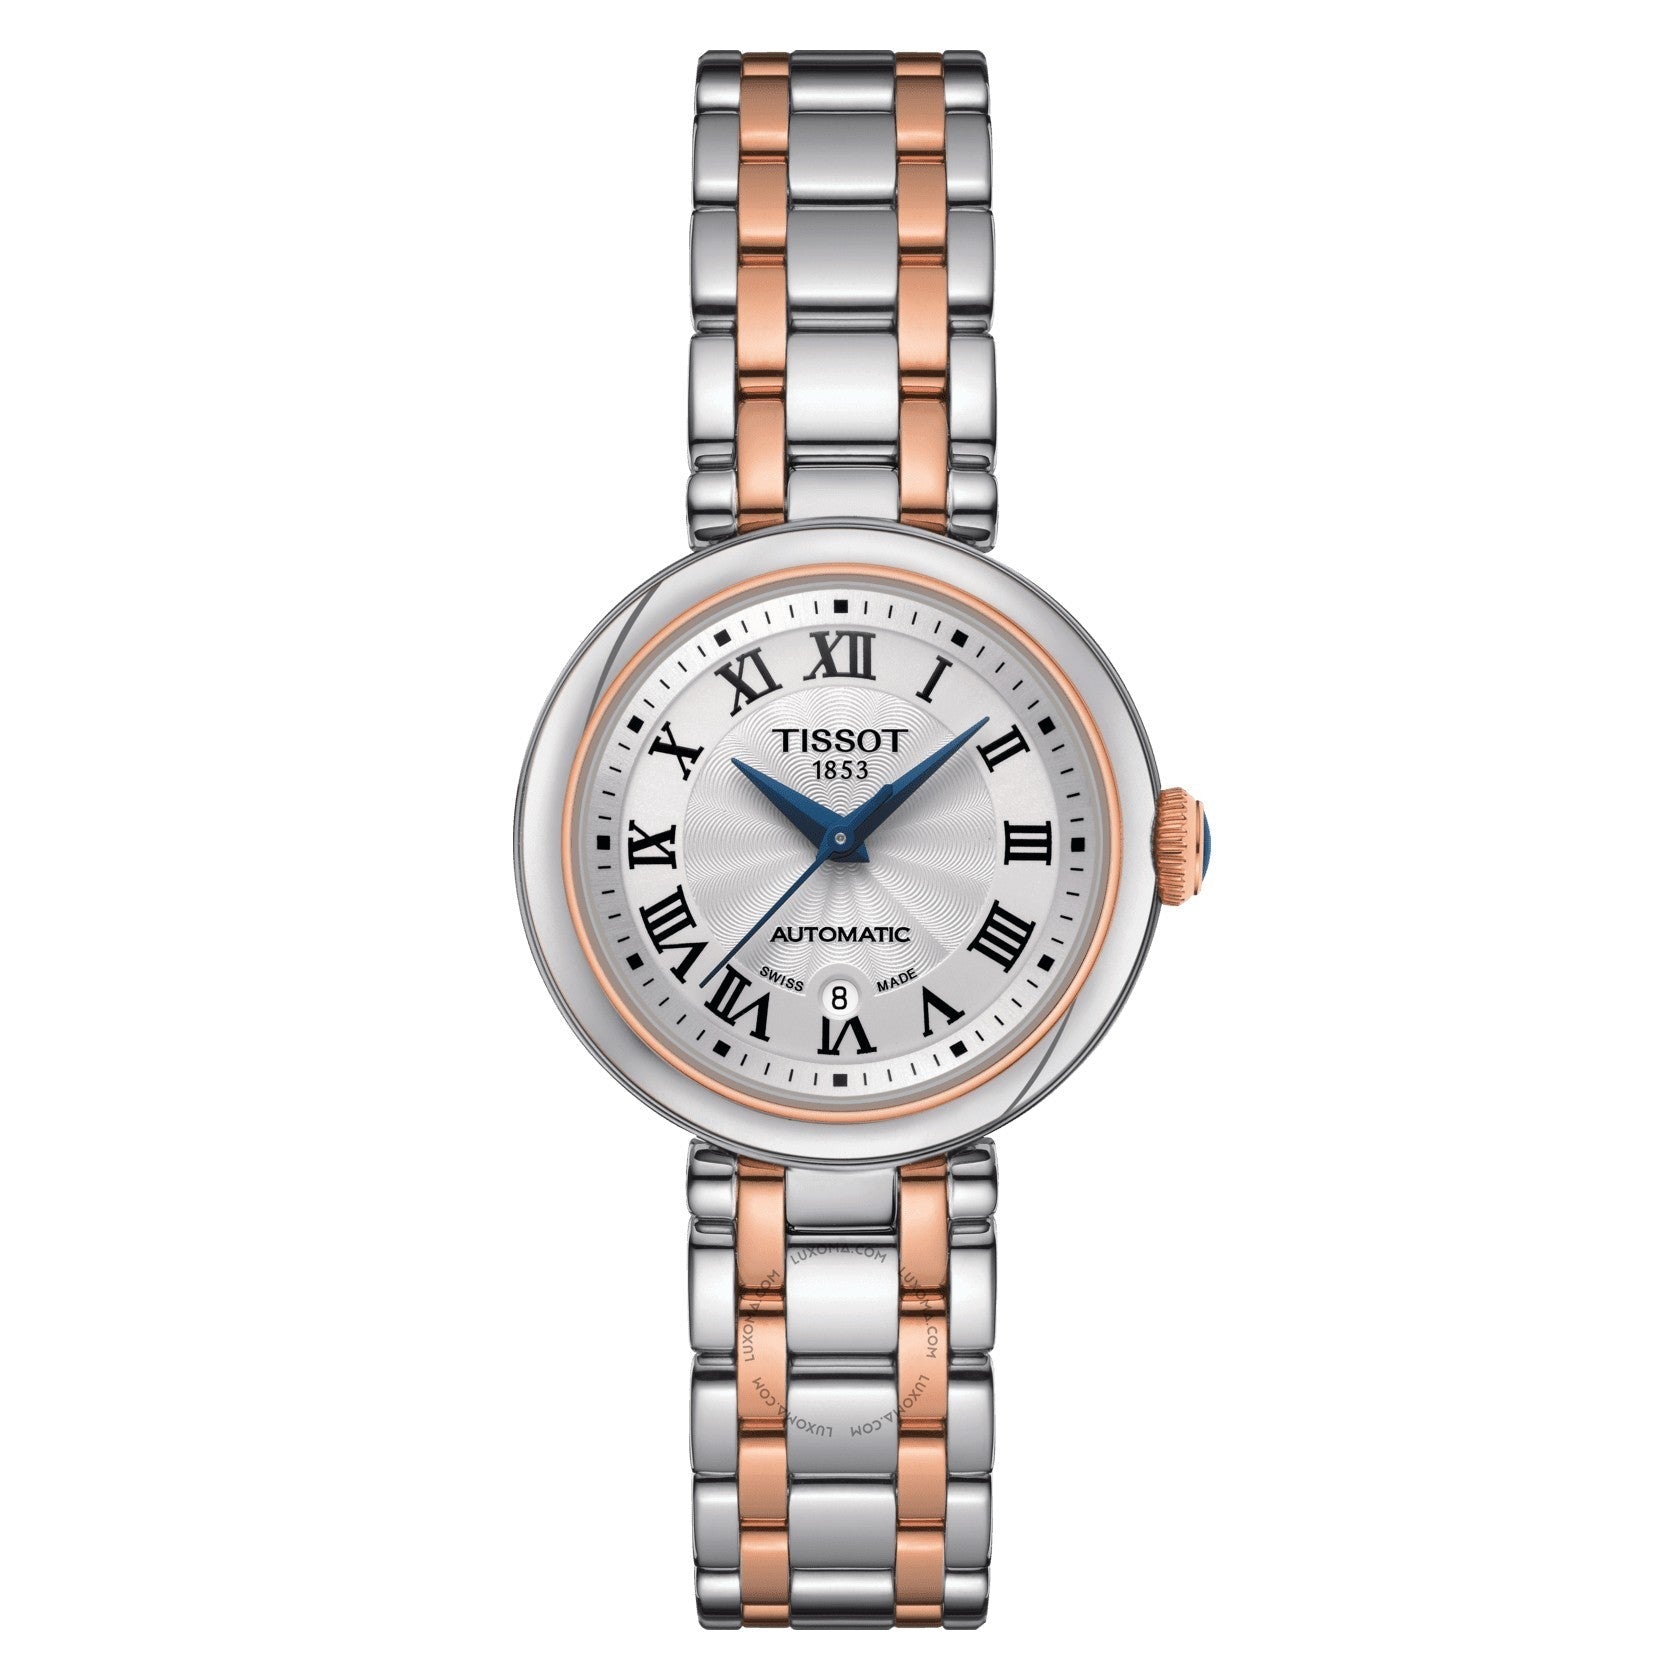 Tissot T-Lady Automatic White Dial Ladies Watch T126.207.22.013.00